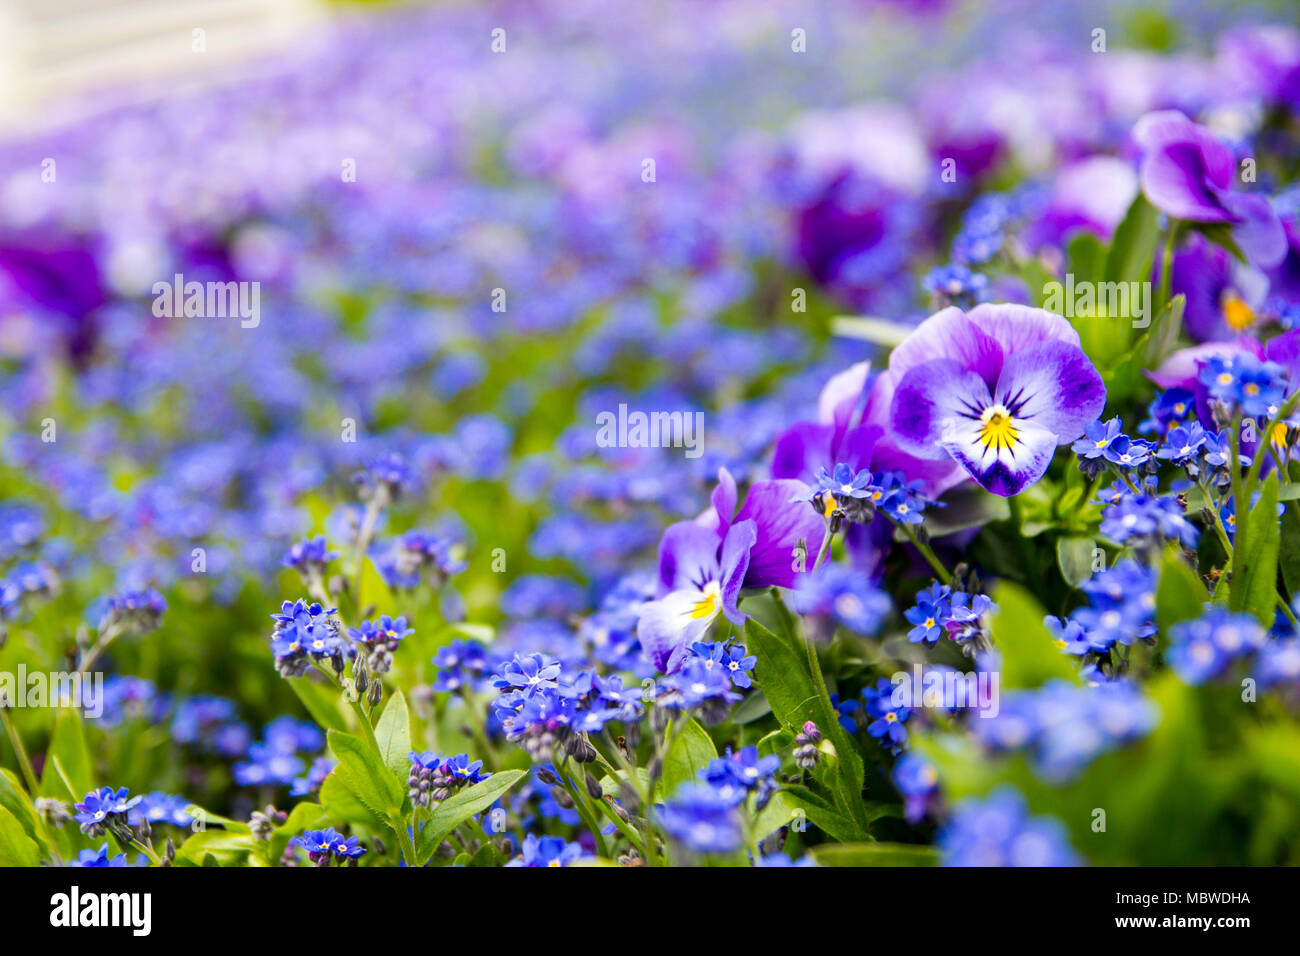 Many Violet viola summer flower in a park Stock Photo